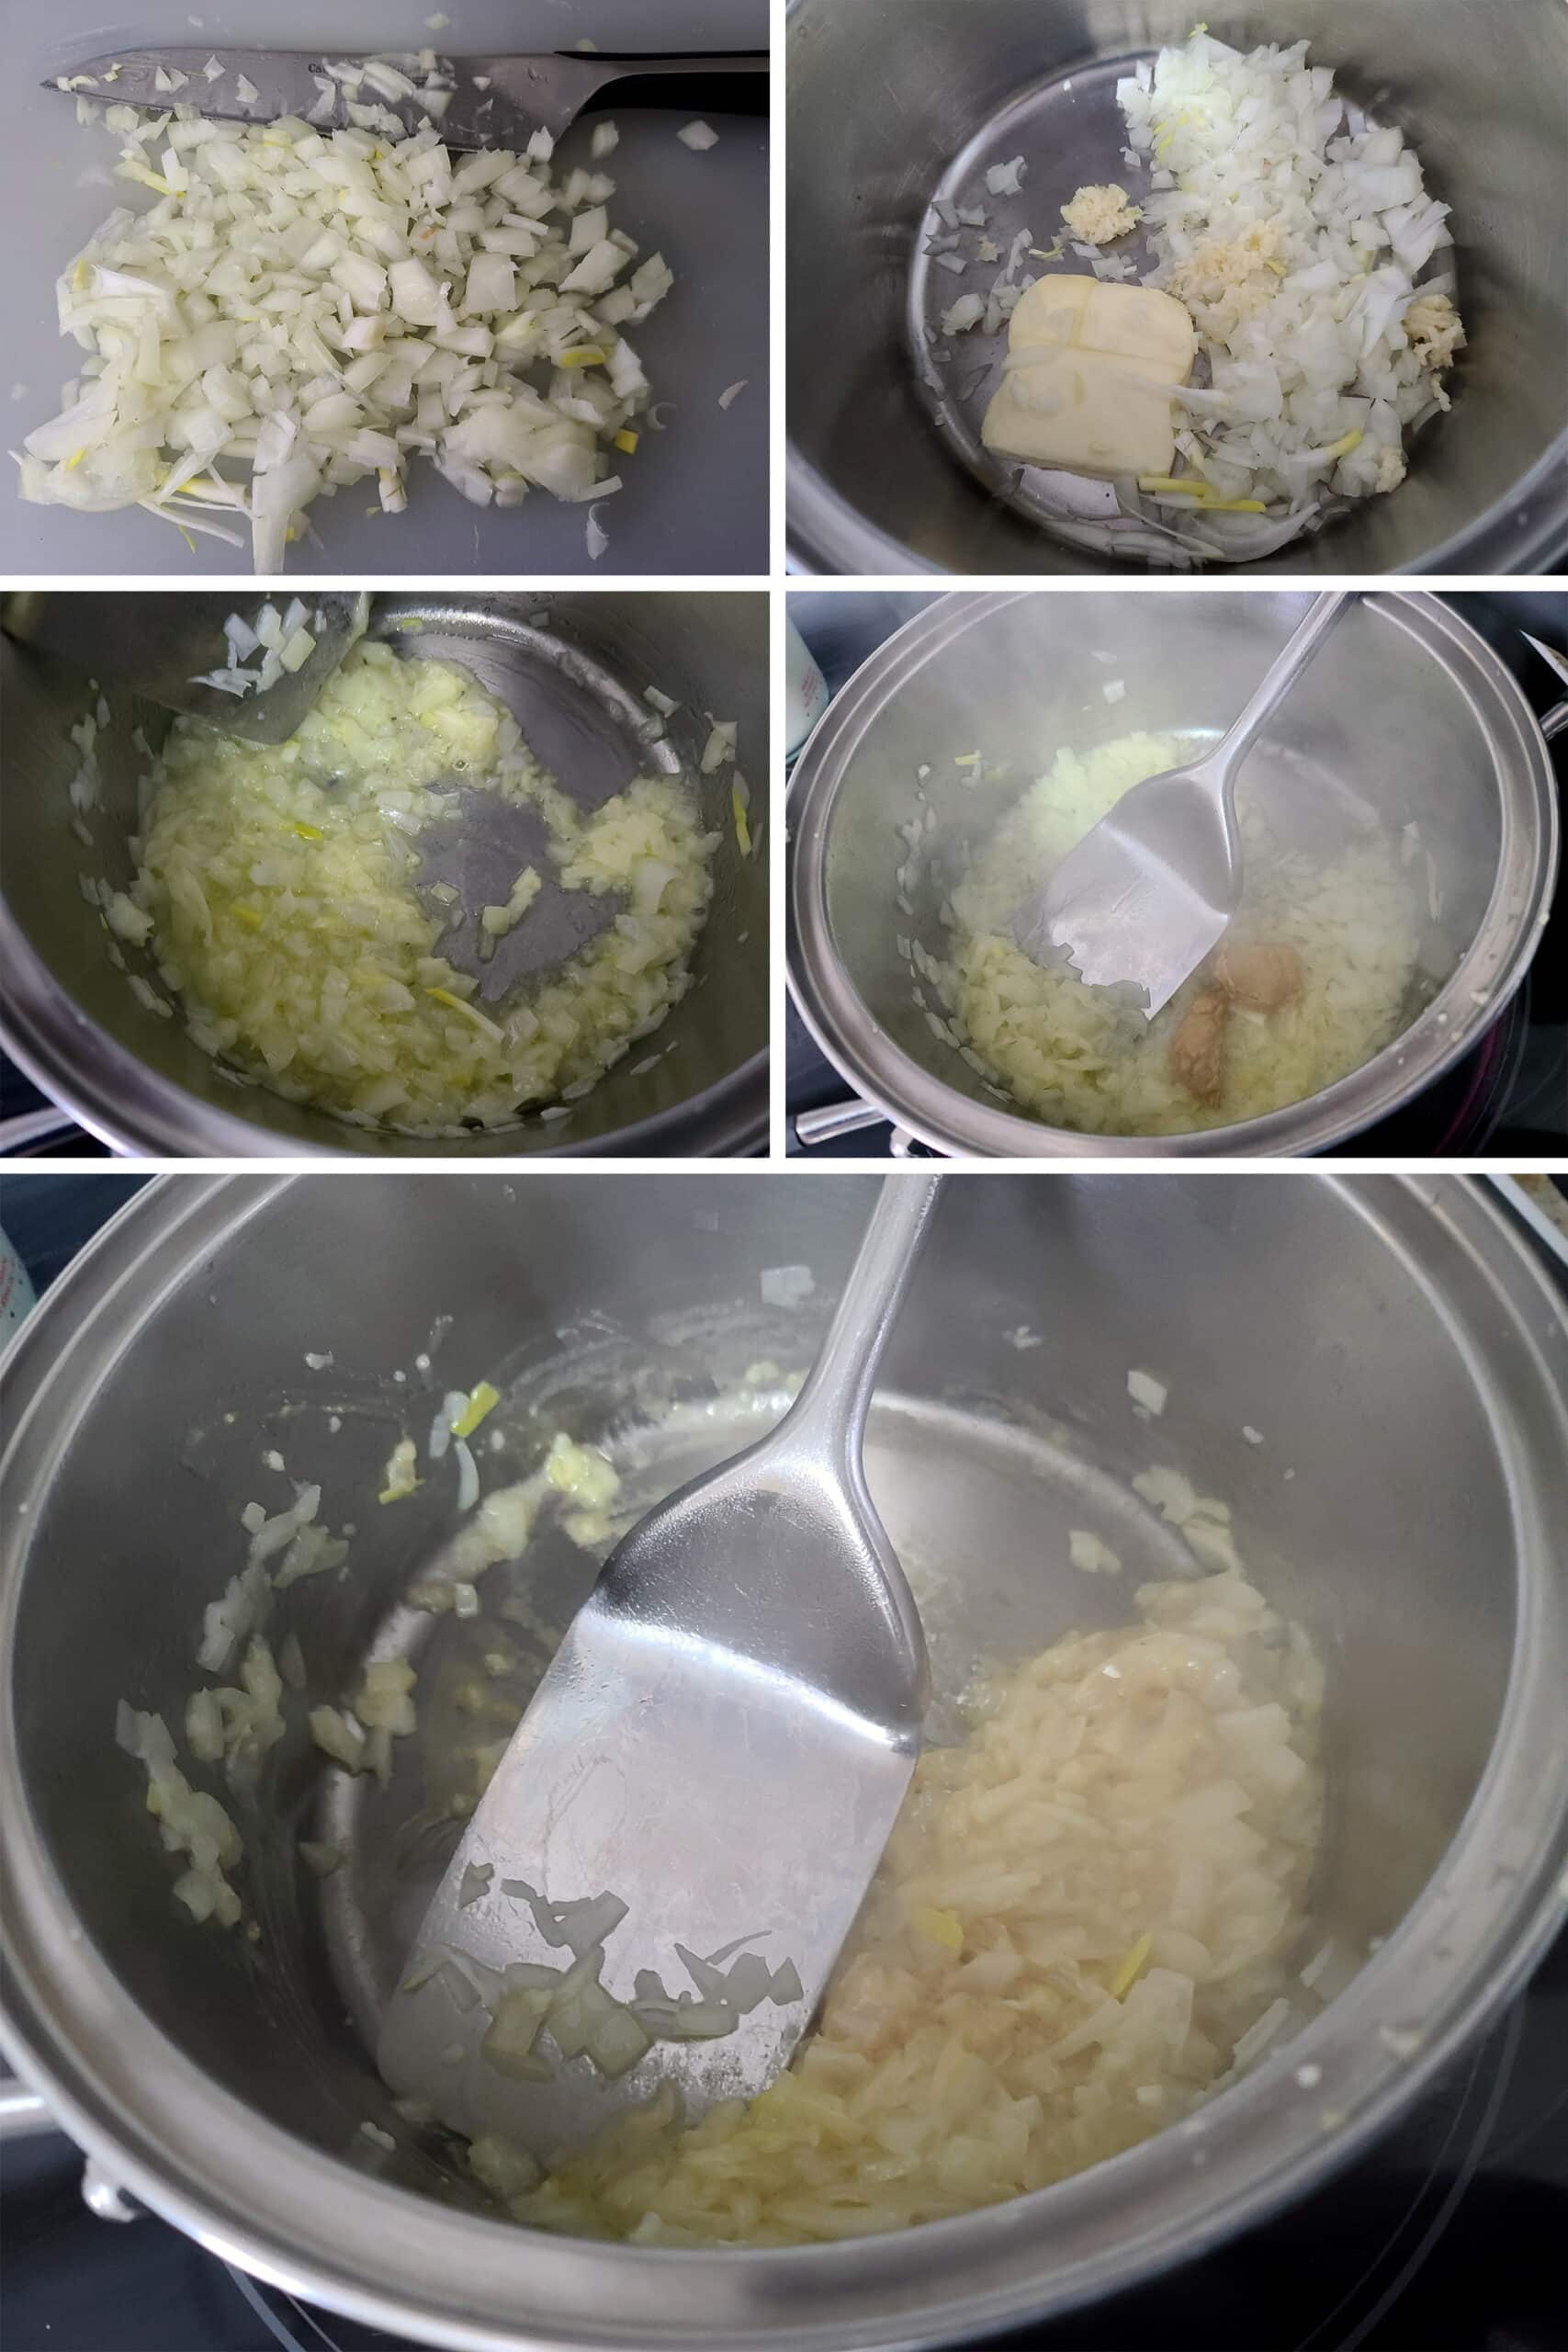 A 5 part image showing onions, garlic, butter, mustard, etc cooking.